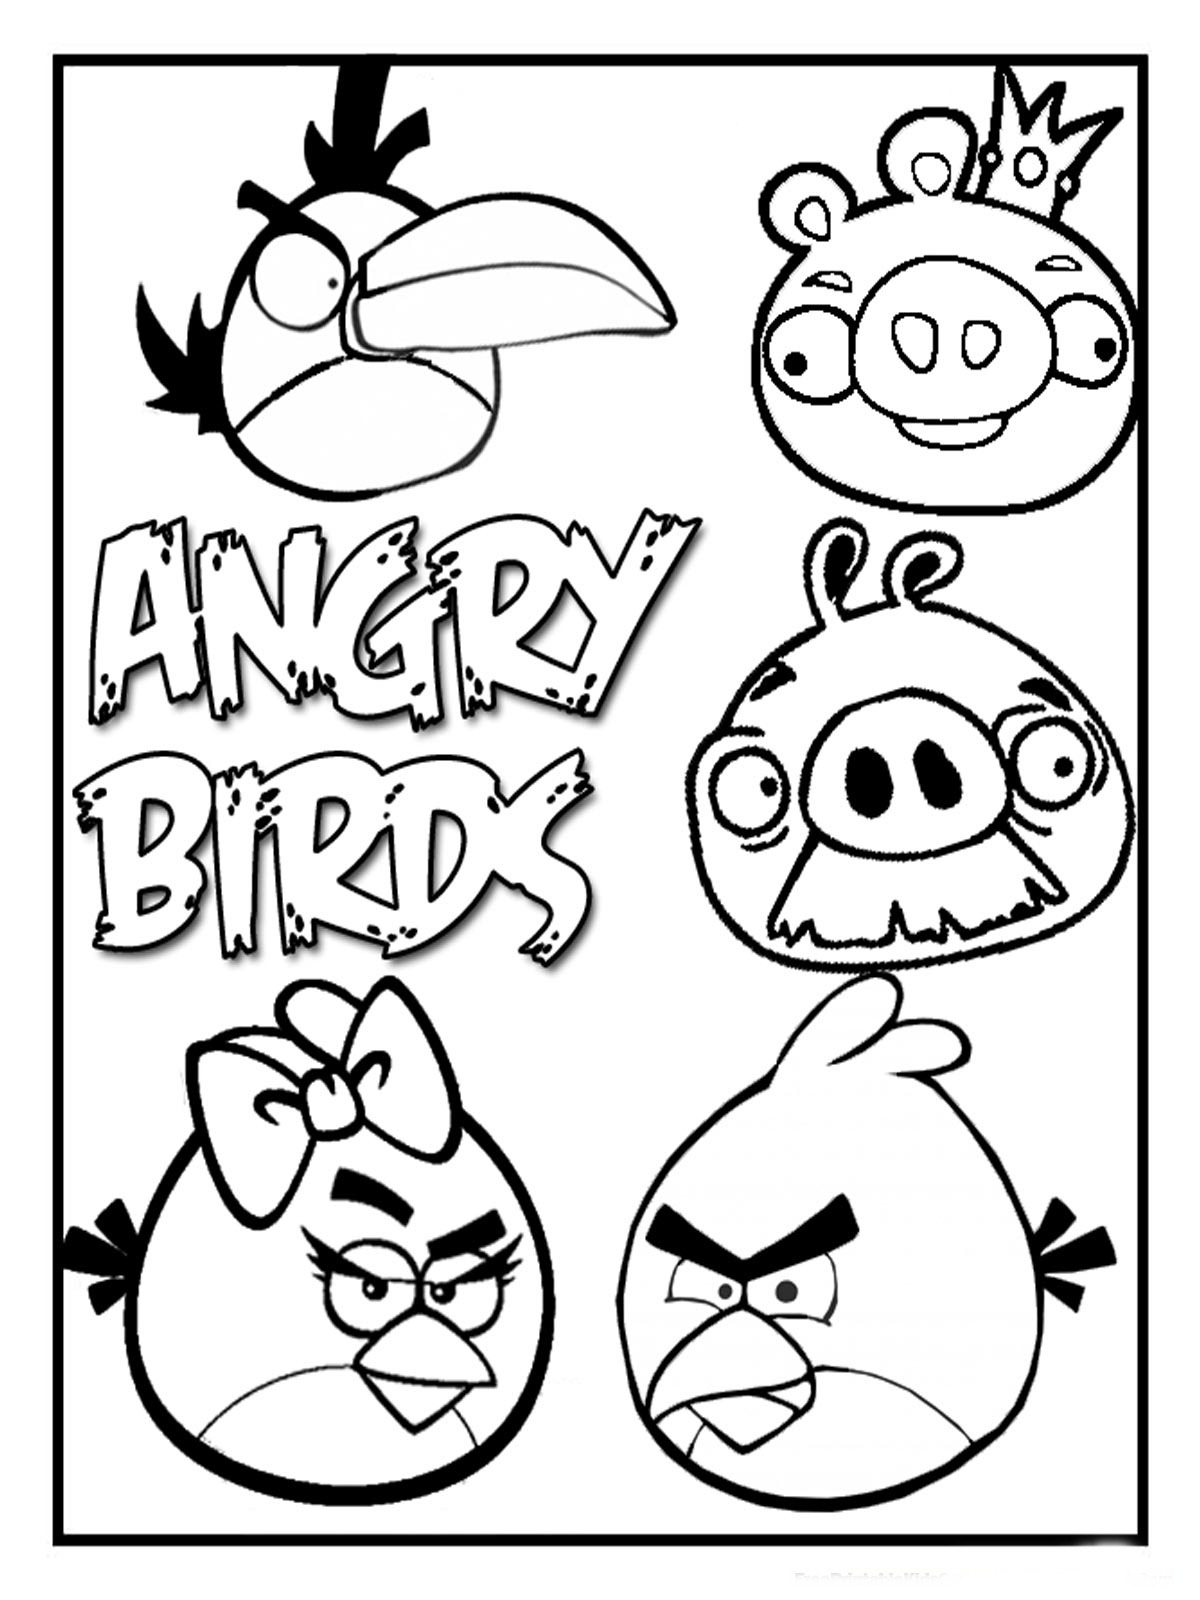 Download Angry Birds Coloring Pages For Kids | Realistic Coloring Pages